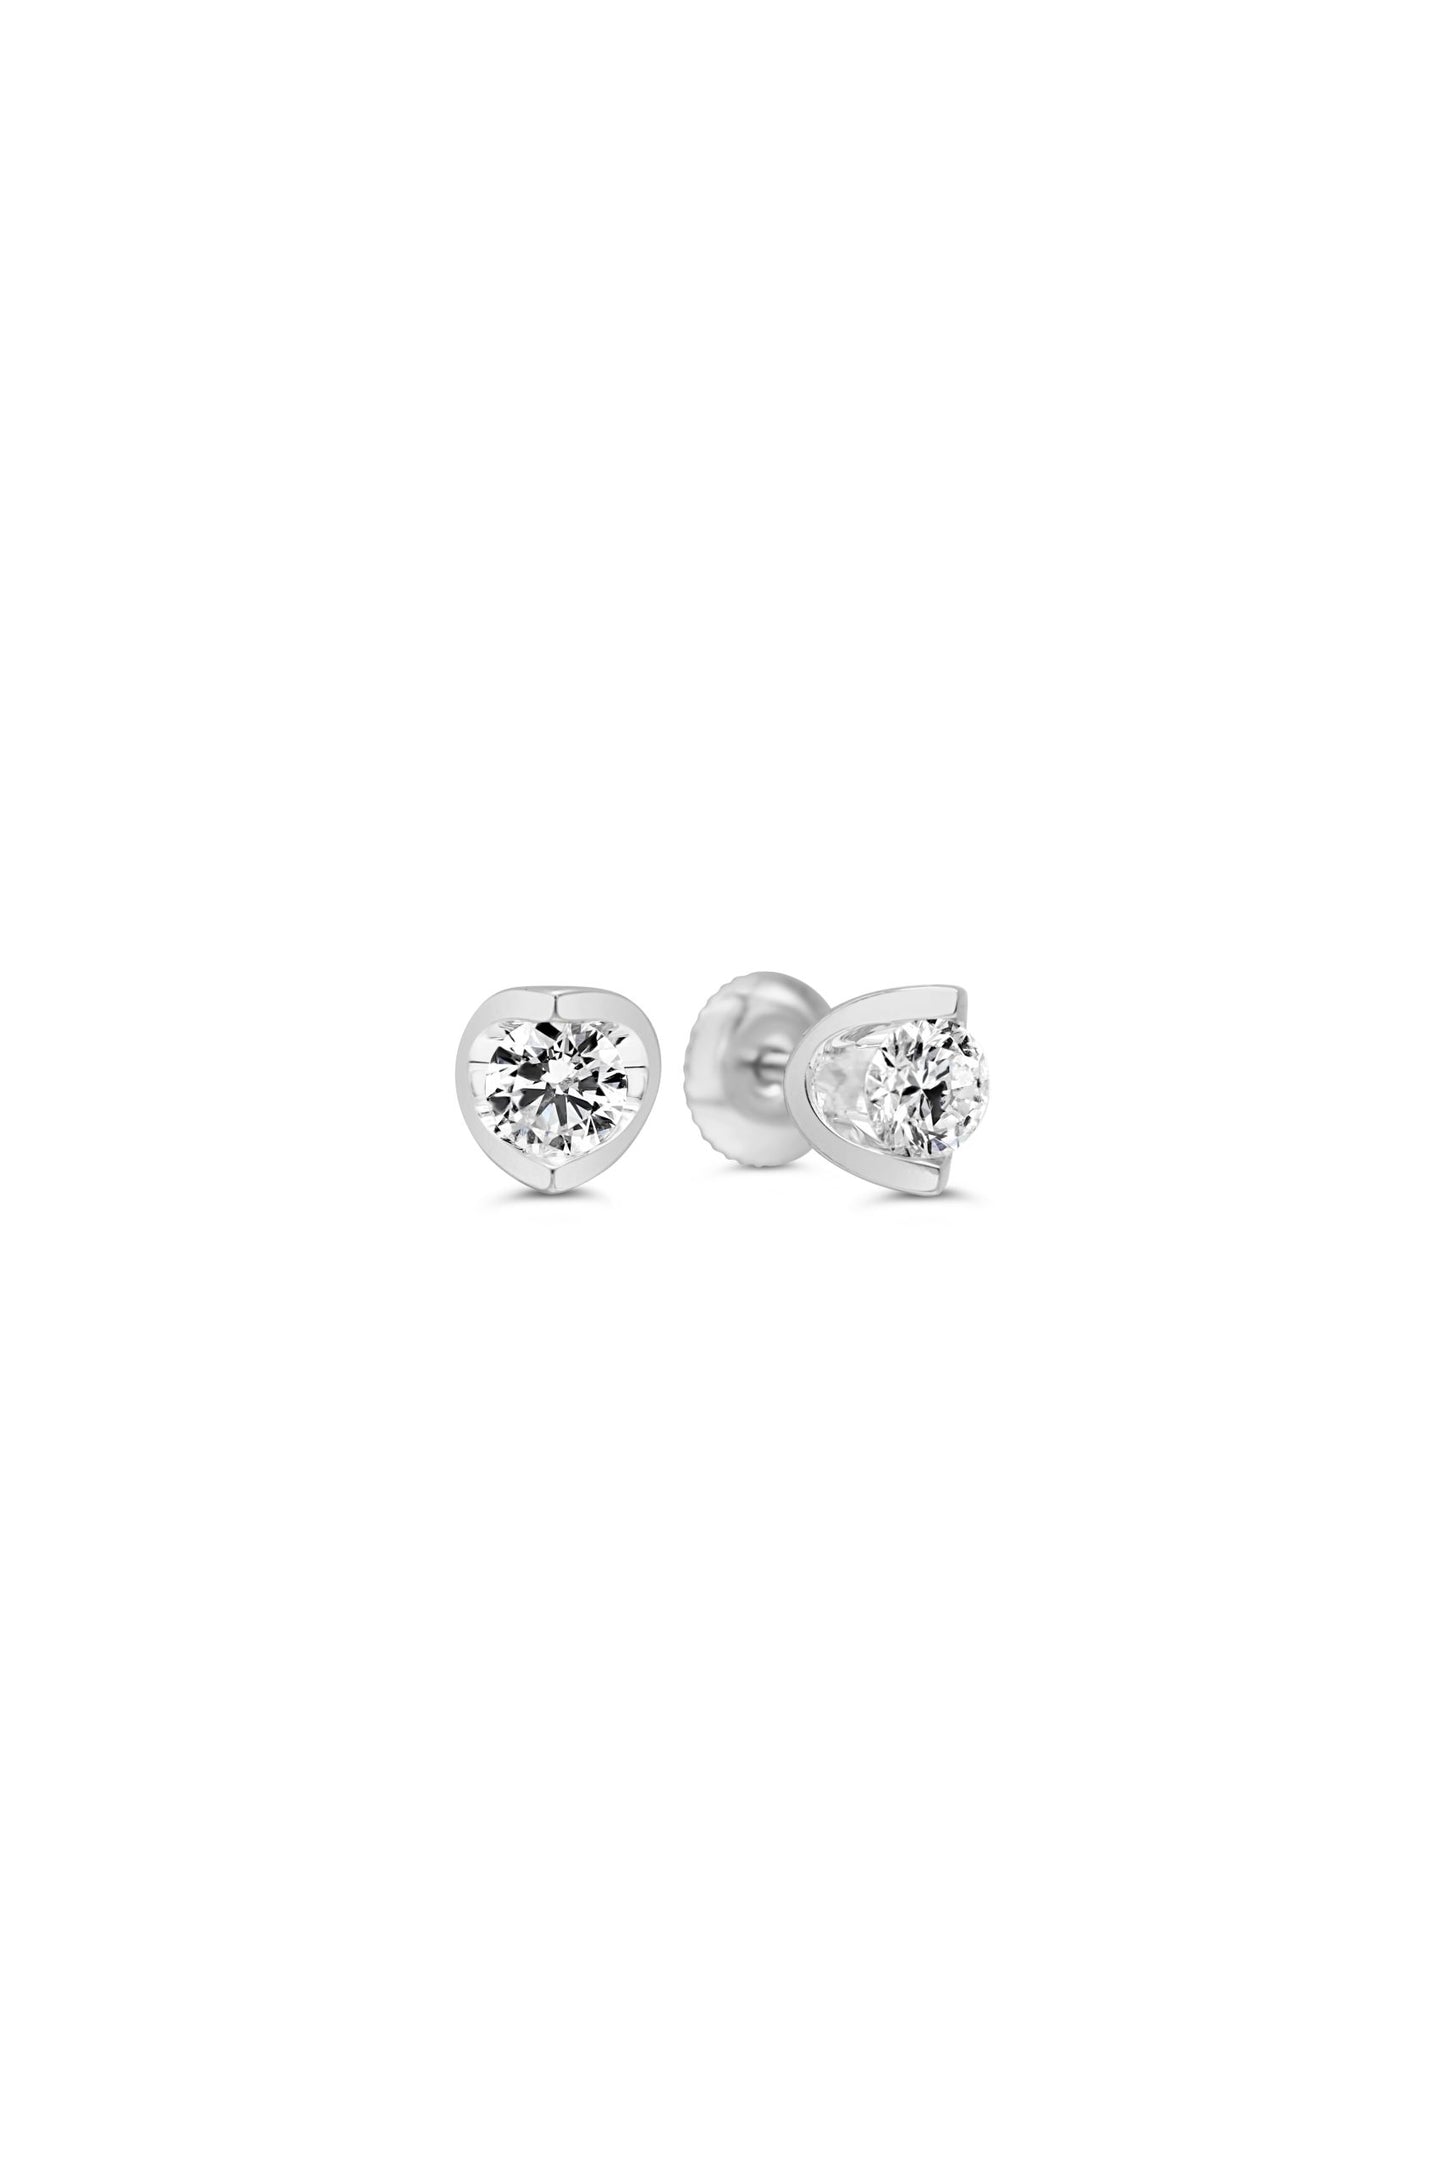 Green Leaf Lab Grown Diamond Earrings 14K White Gold Half Moon Collection Screwback studs- .50ct